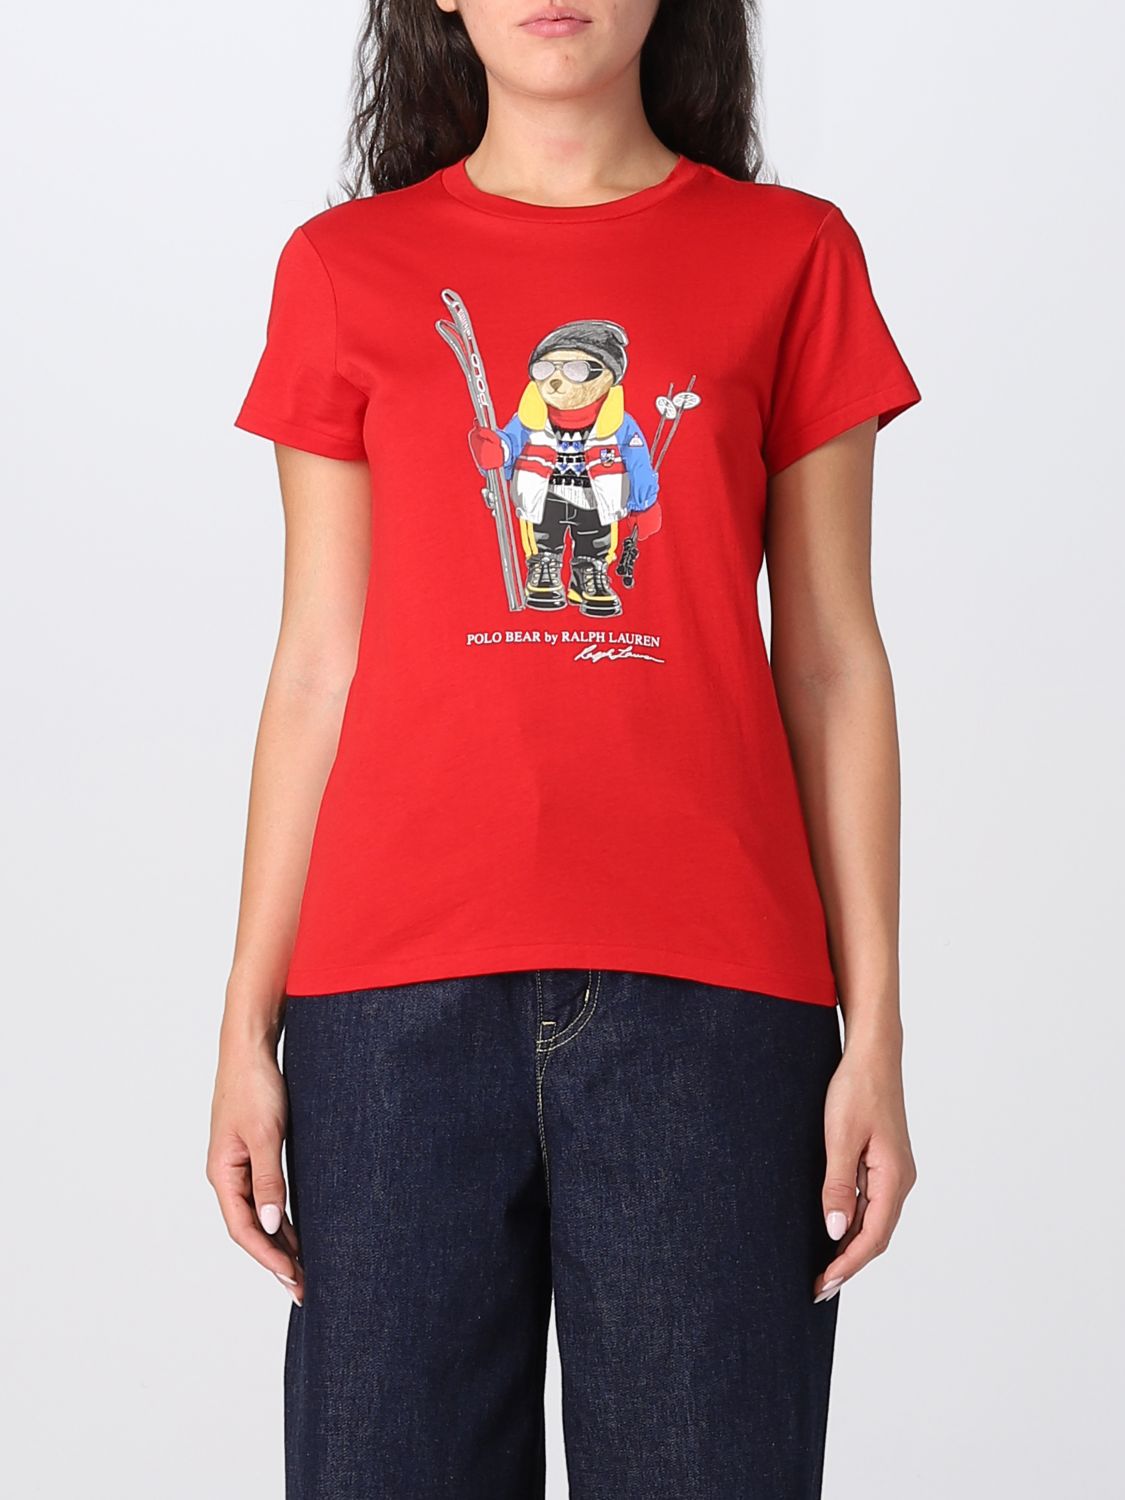 Polo Ralph Lauren Outlet: t-shirt for woman - Red | Polo Ralph Lauren t- shirt 211882281 online on 